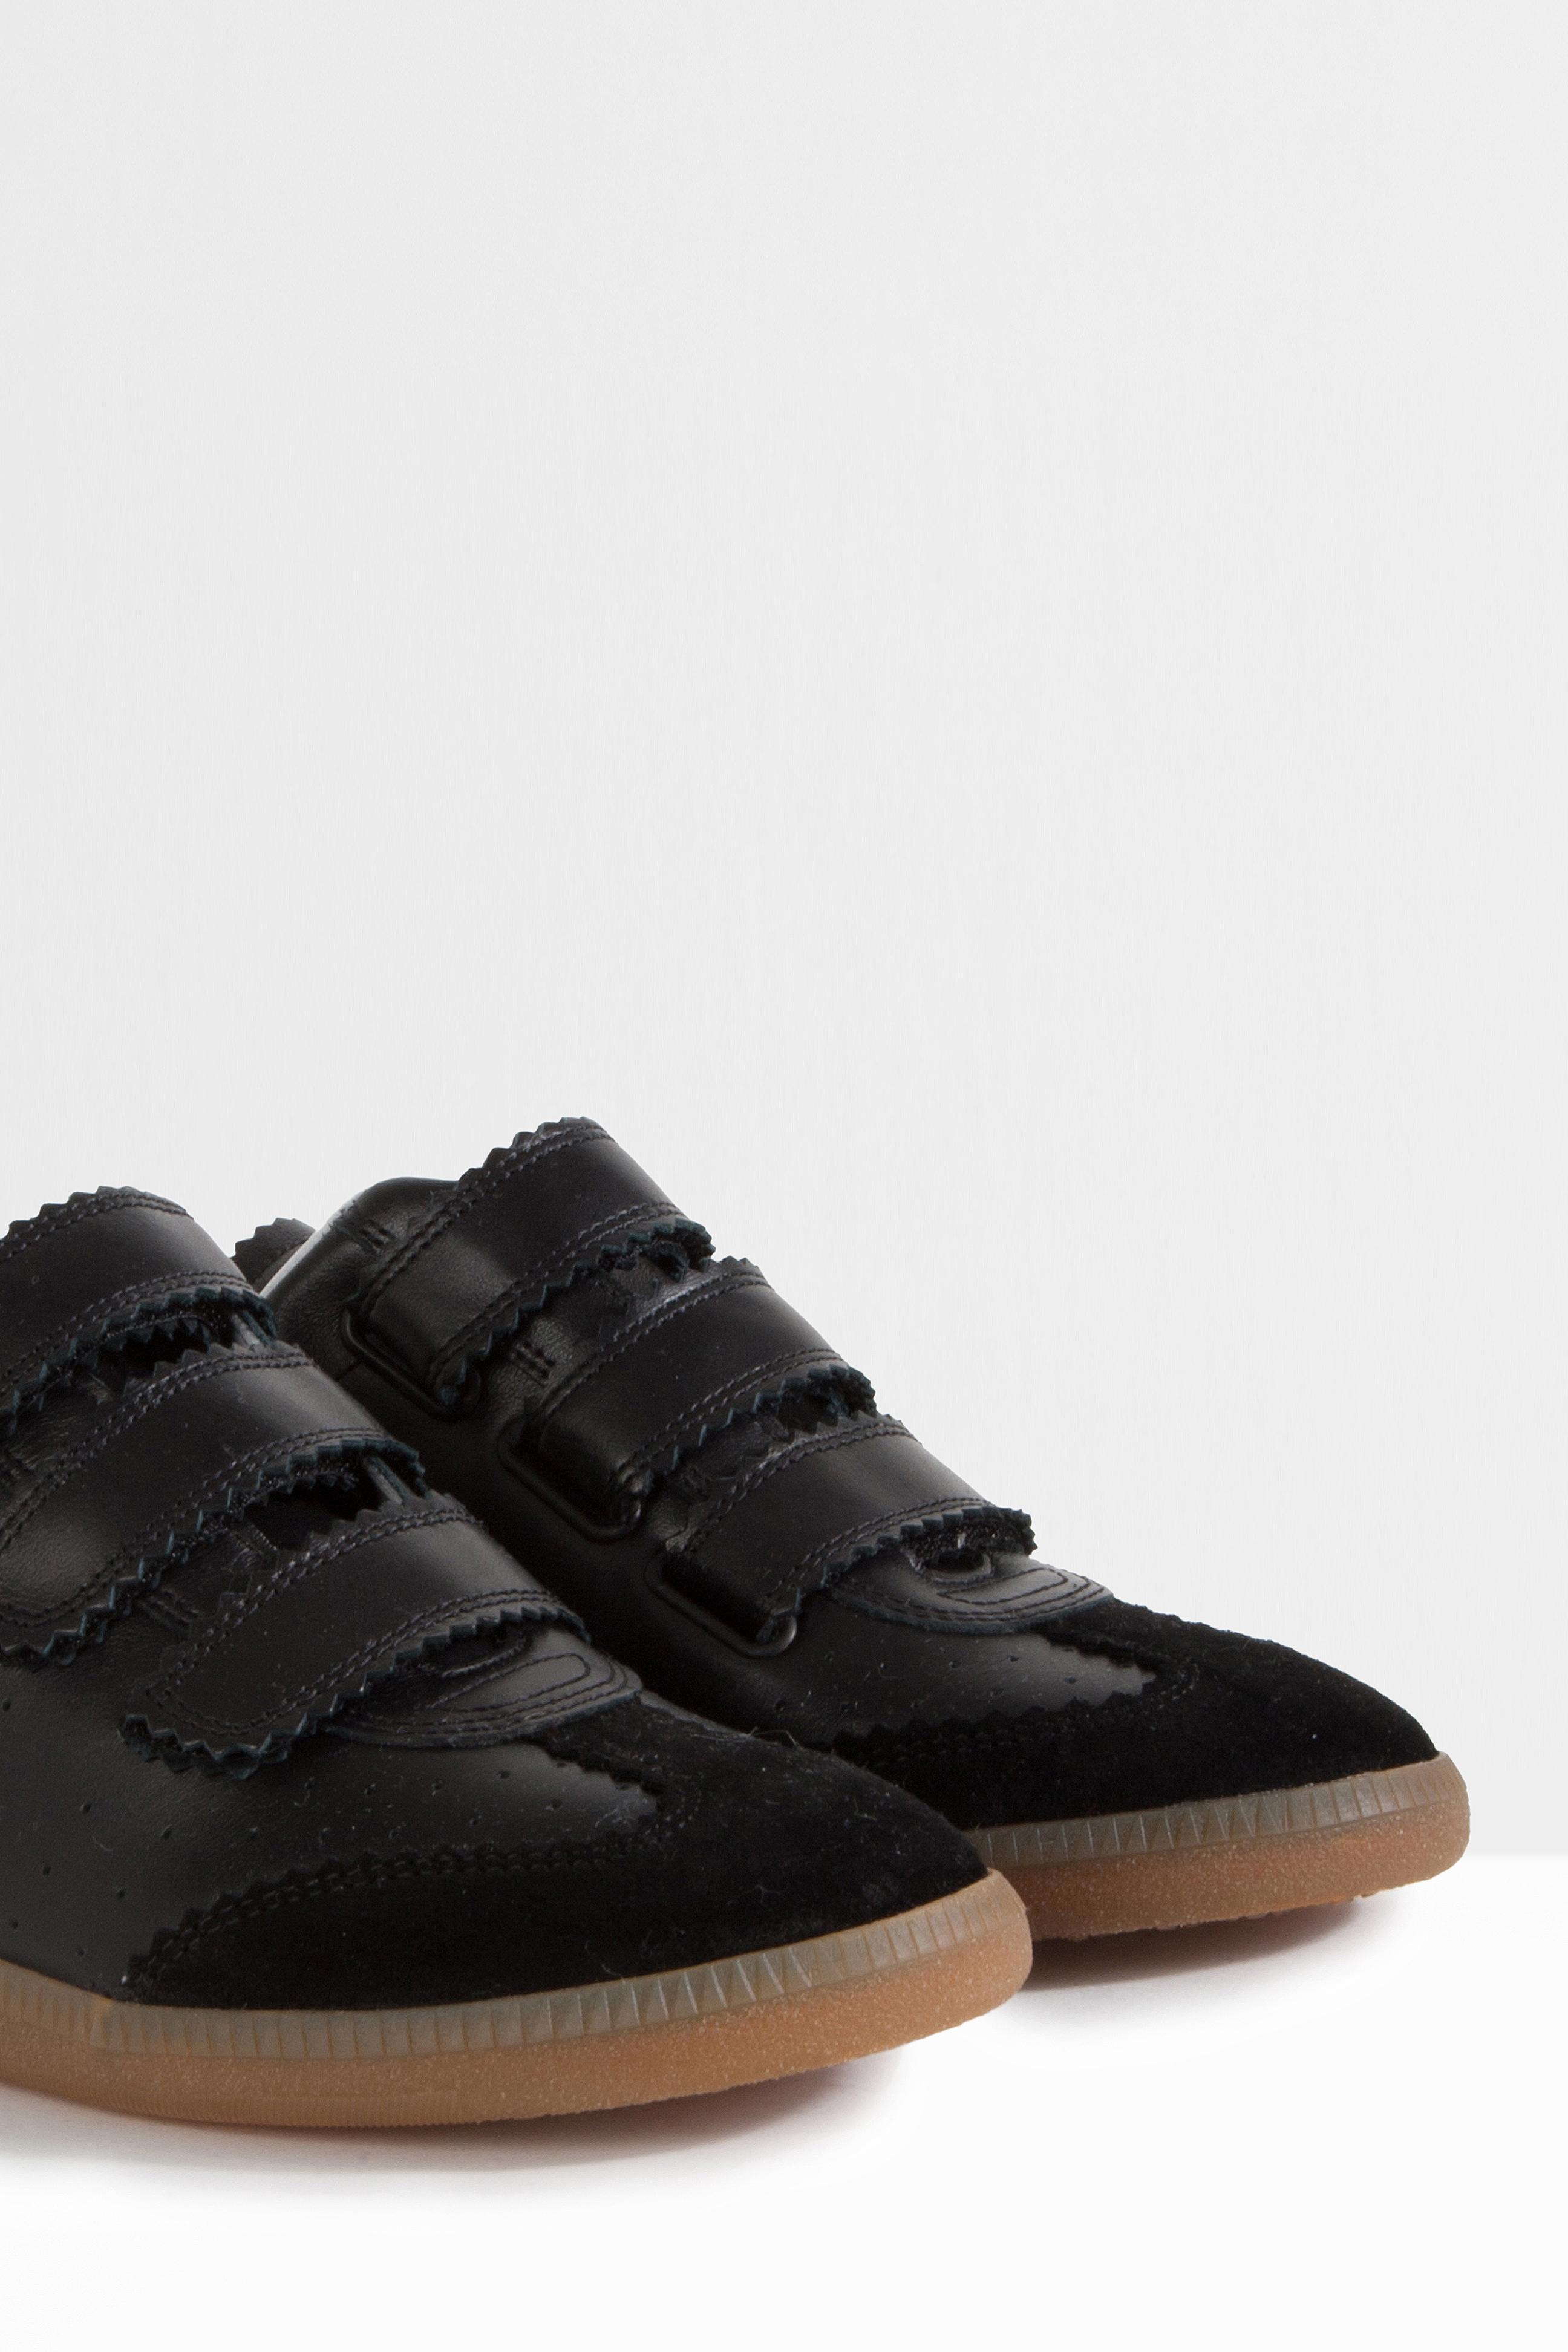 Lyst - Étoile Isabel Marant Beth Trainers in Black